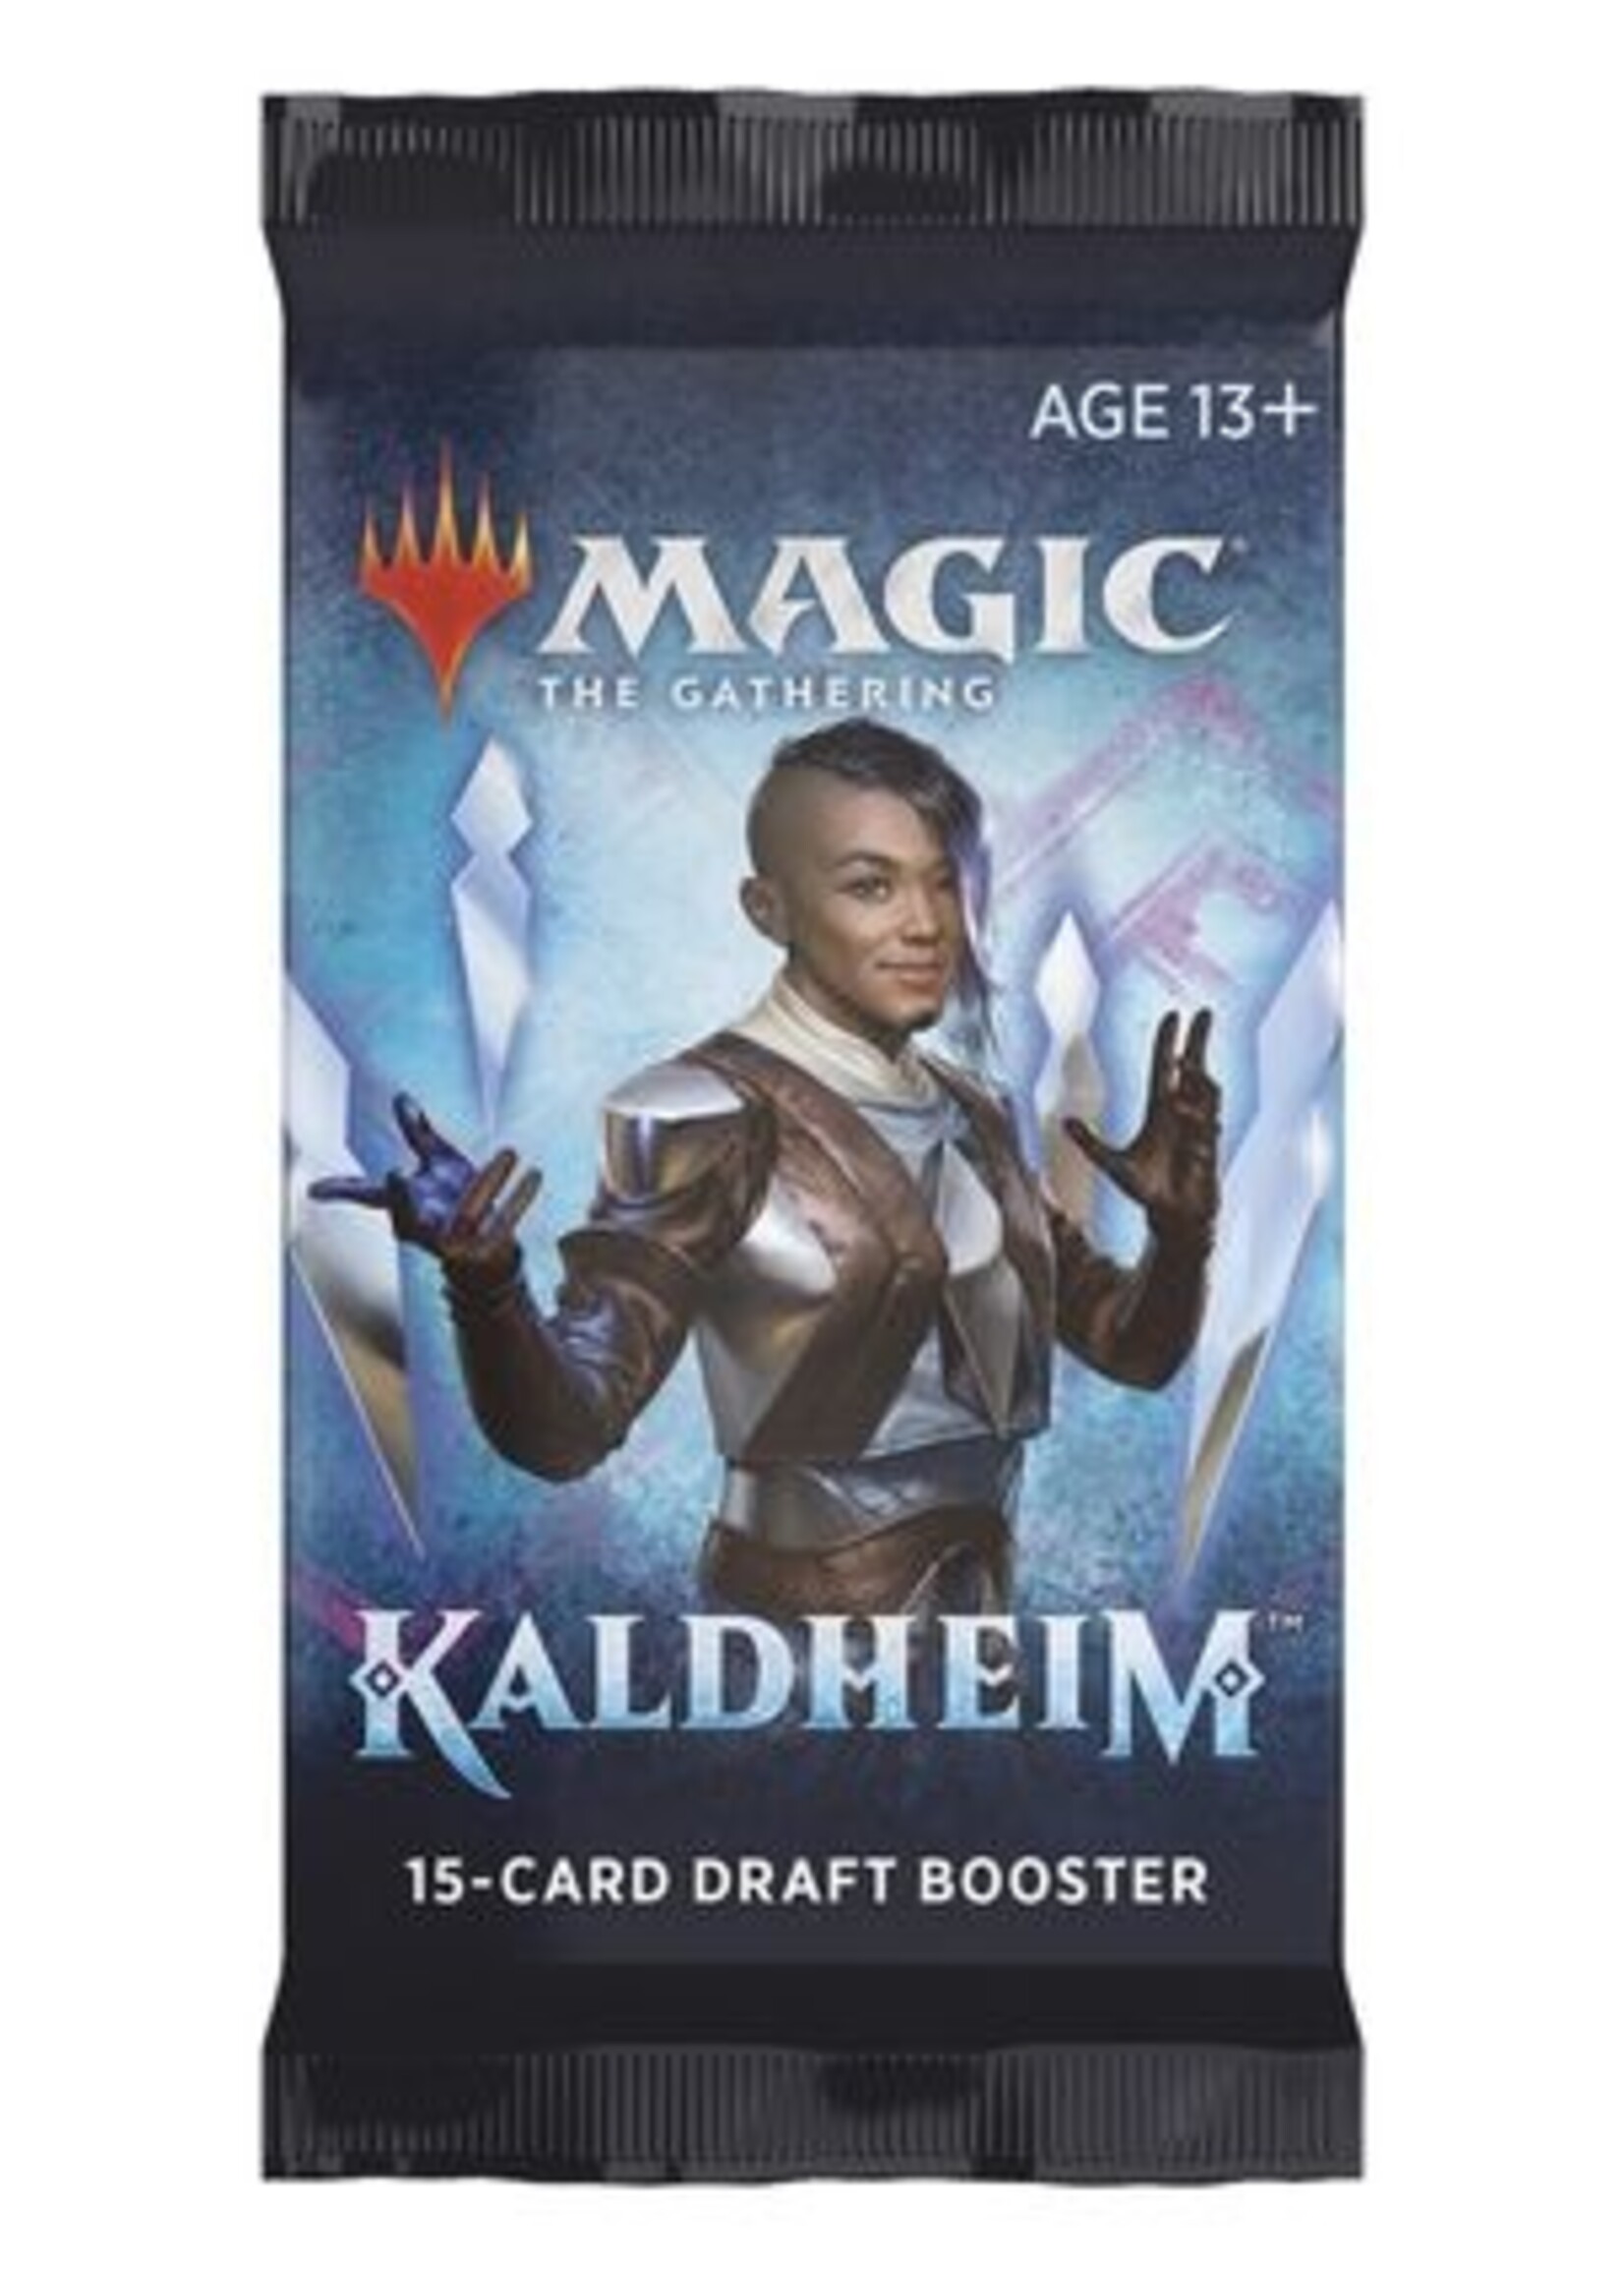 Wizards of the Coast - "Kaldheim" Draft Booster